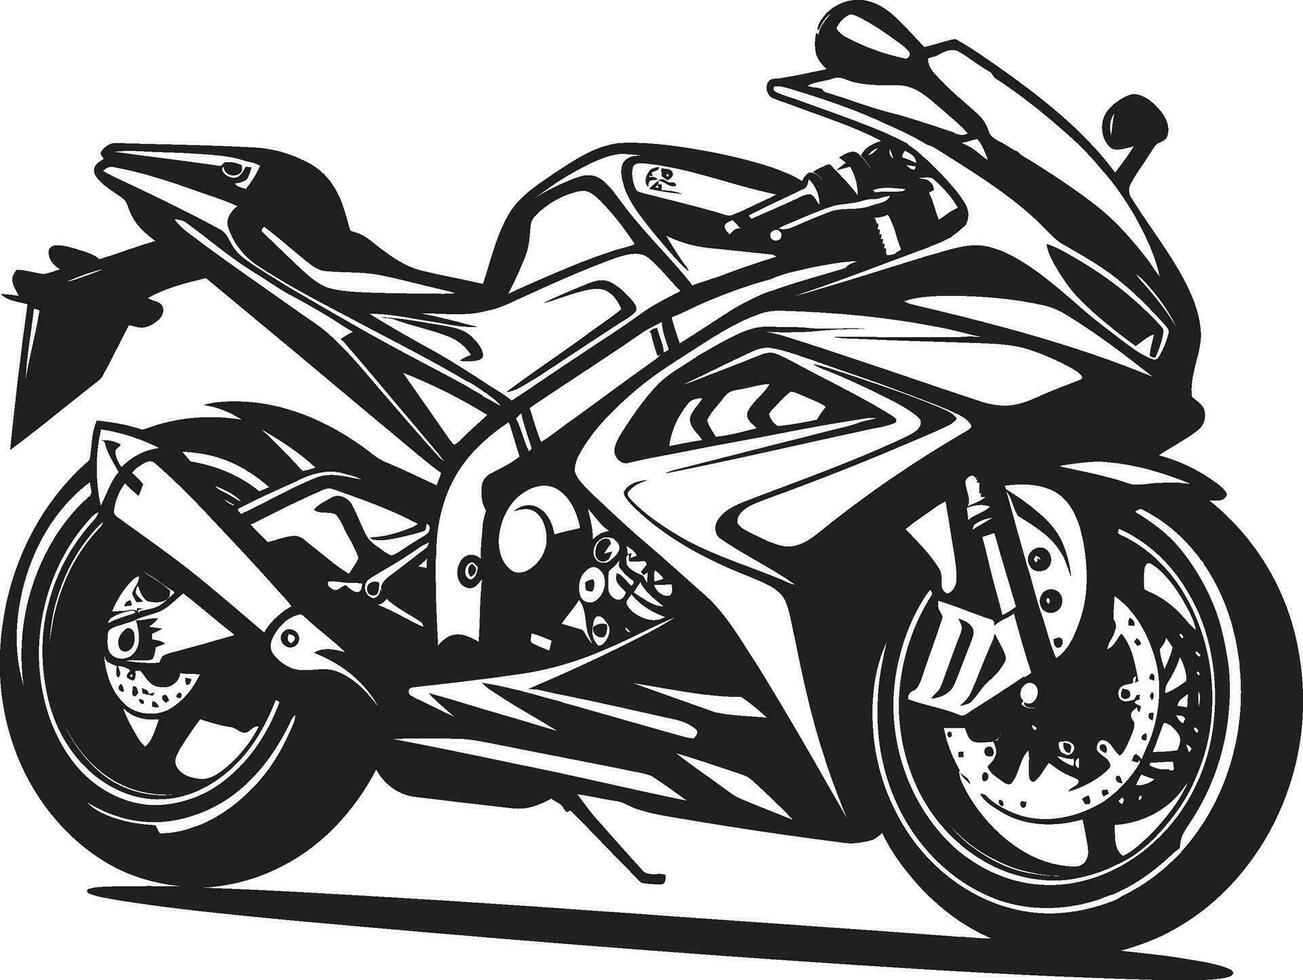 Motion in the Lines Sports Bike Vector Adventures Bike Art Galore Sports Bike Vector Showcase